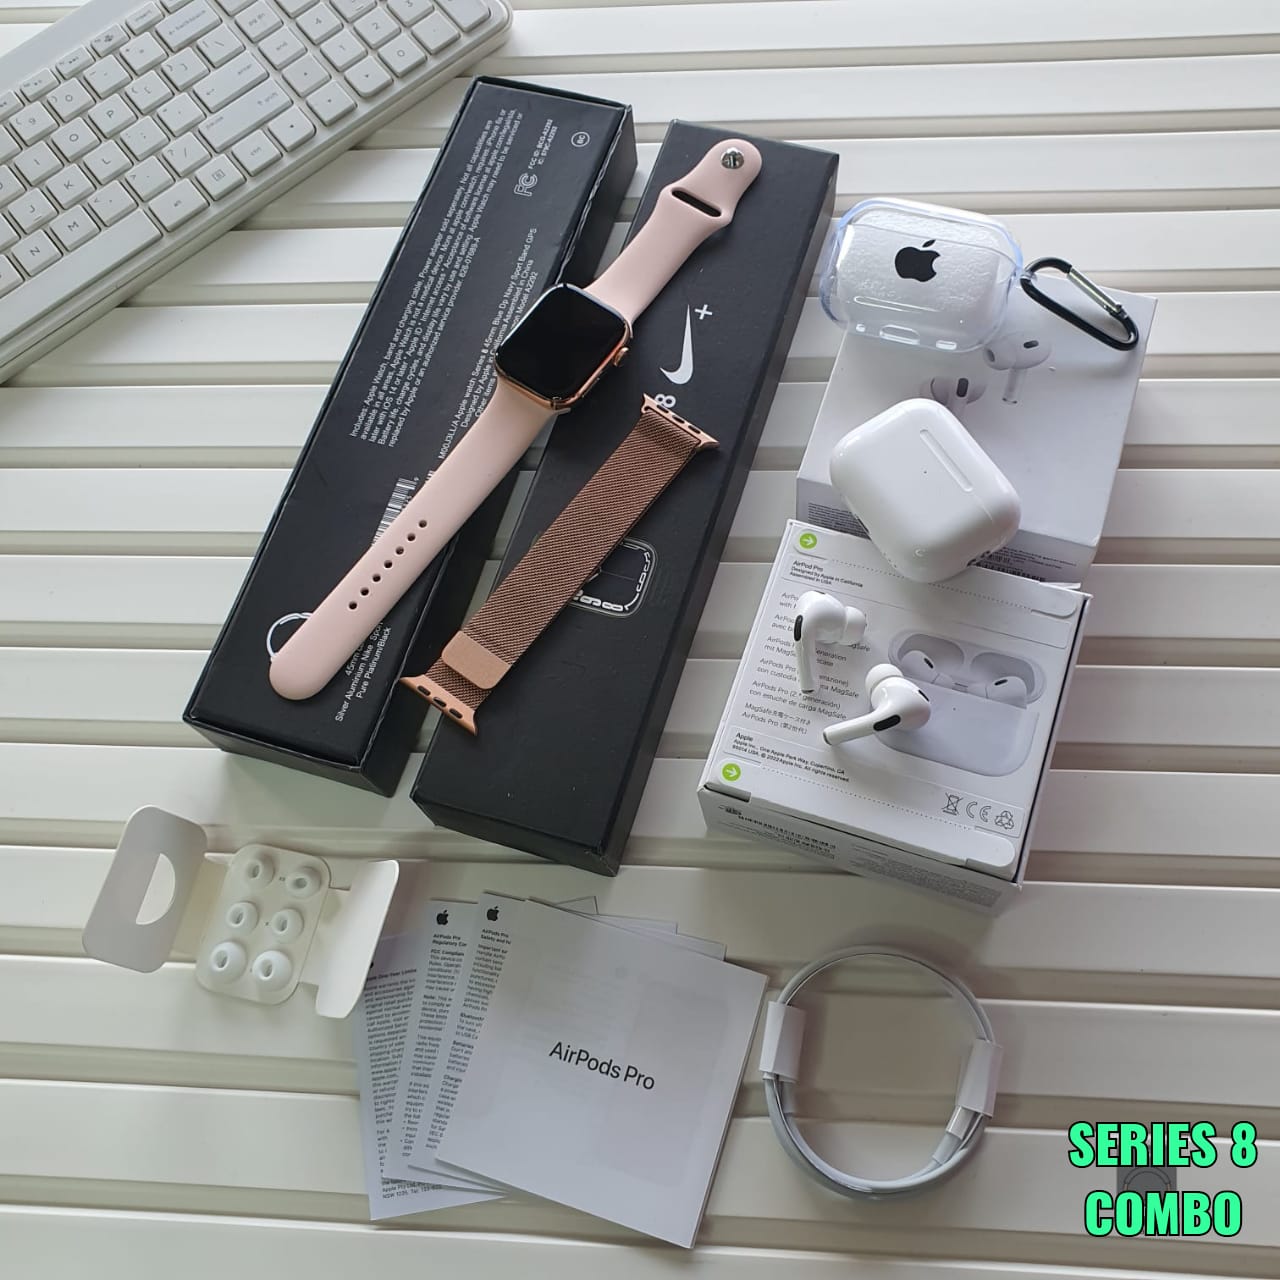 Series 8 combo including series 8 watch, earpods pro 2 with case and metal strap